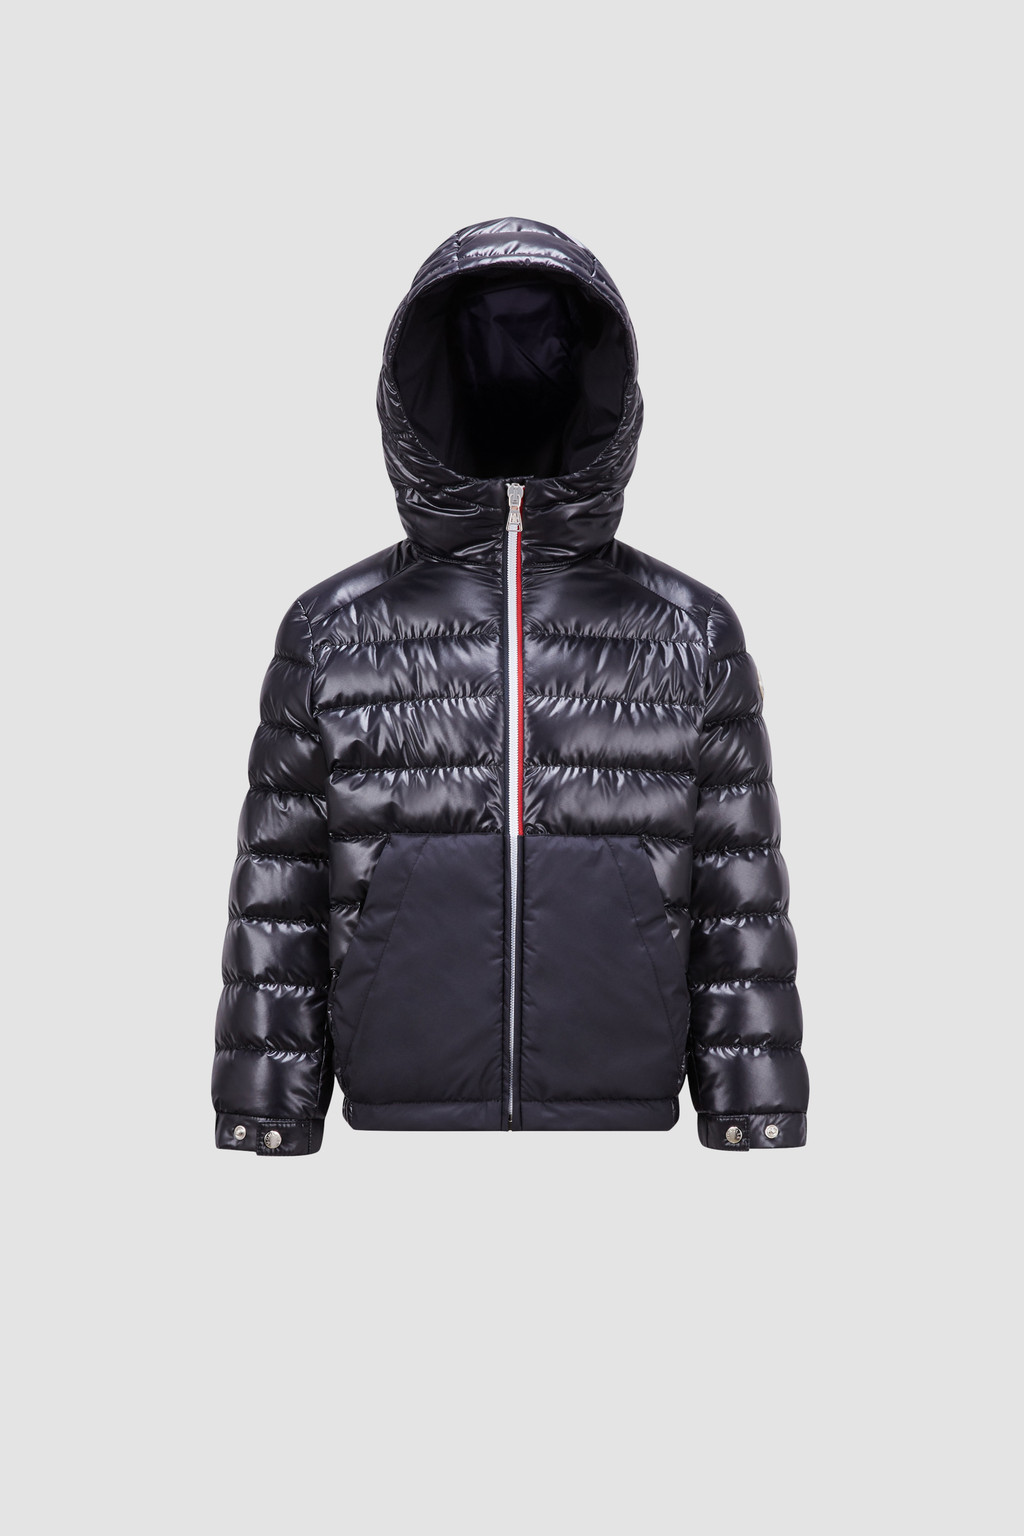 Boys Thick Warm Winter Coat Casual Style Kids Jackets Boys For Teenage Kids  230614 From Men07, $20.83 | DHgate.Com